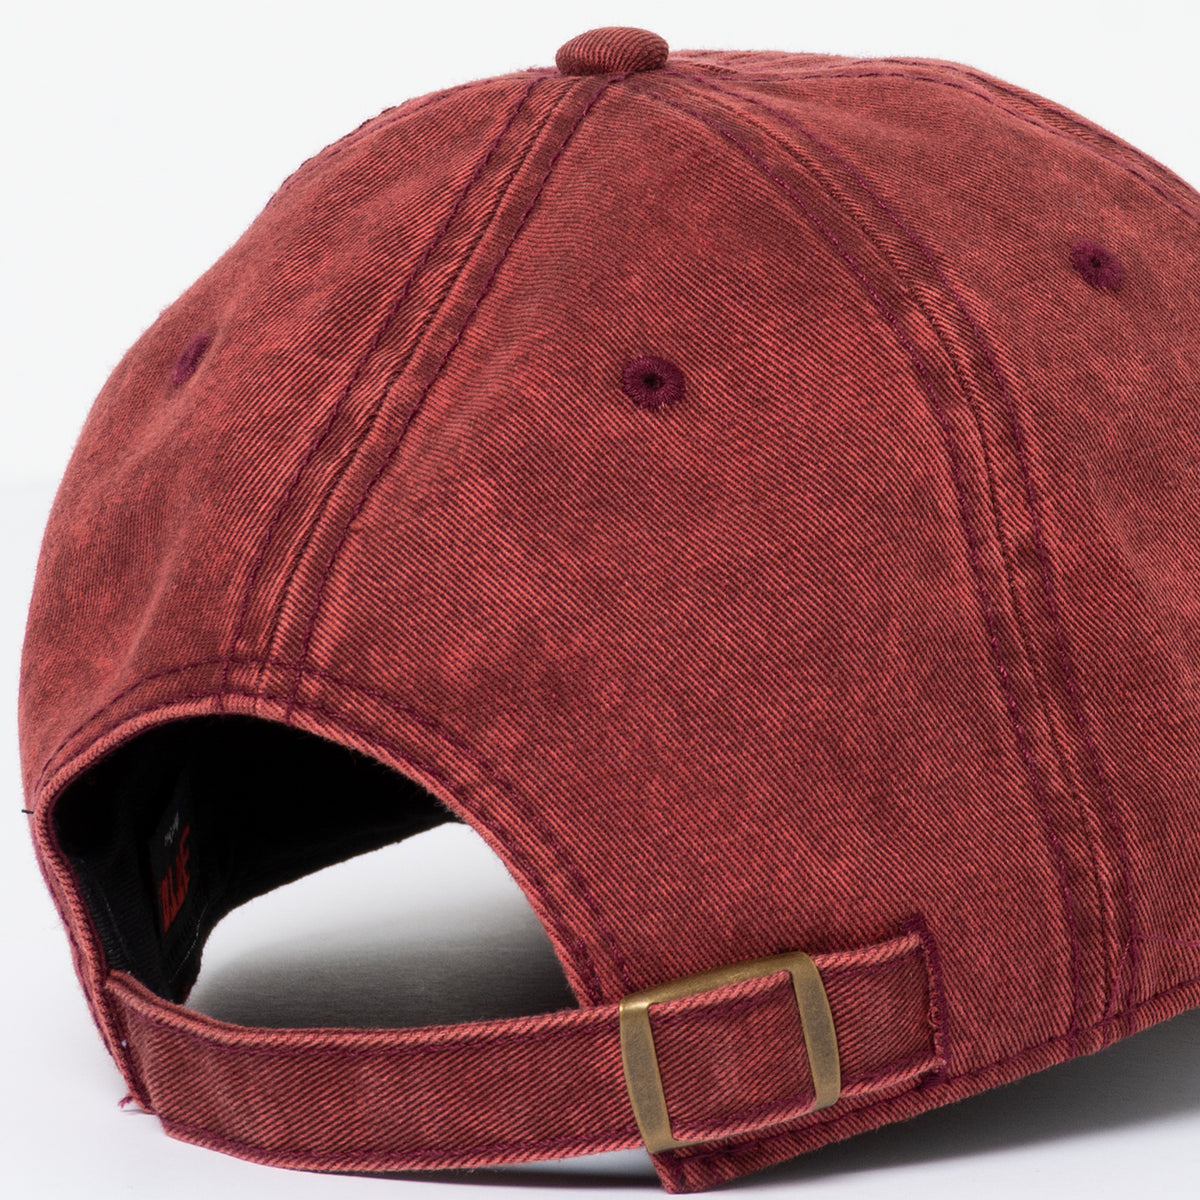 Peaceful Embroidered Hat (Maroon)